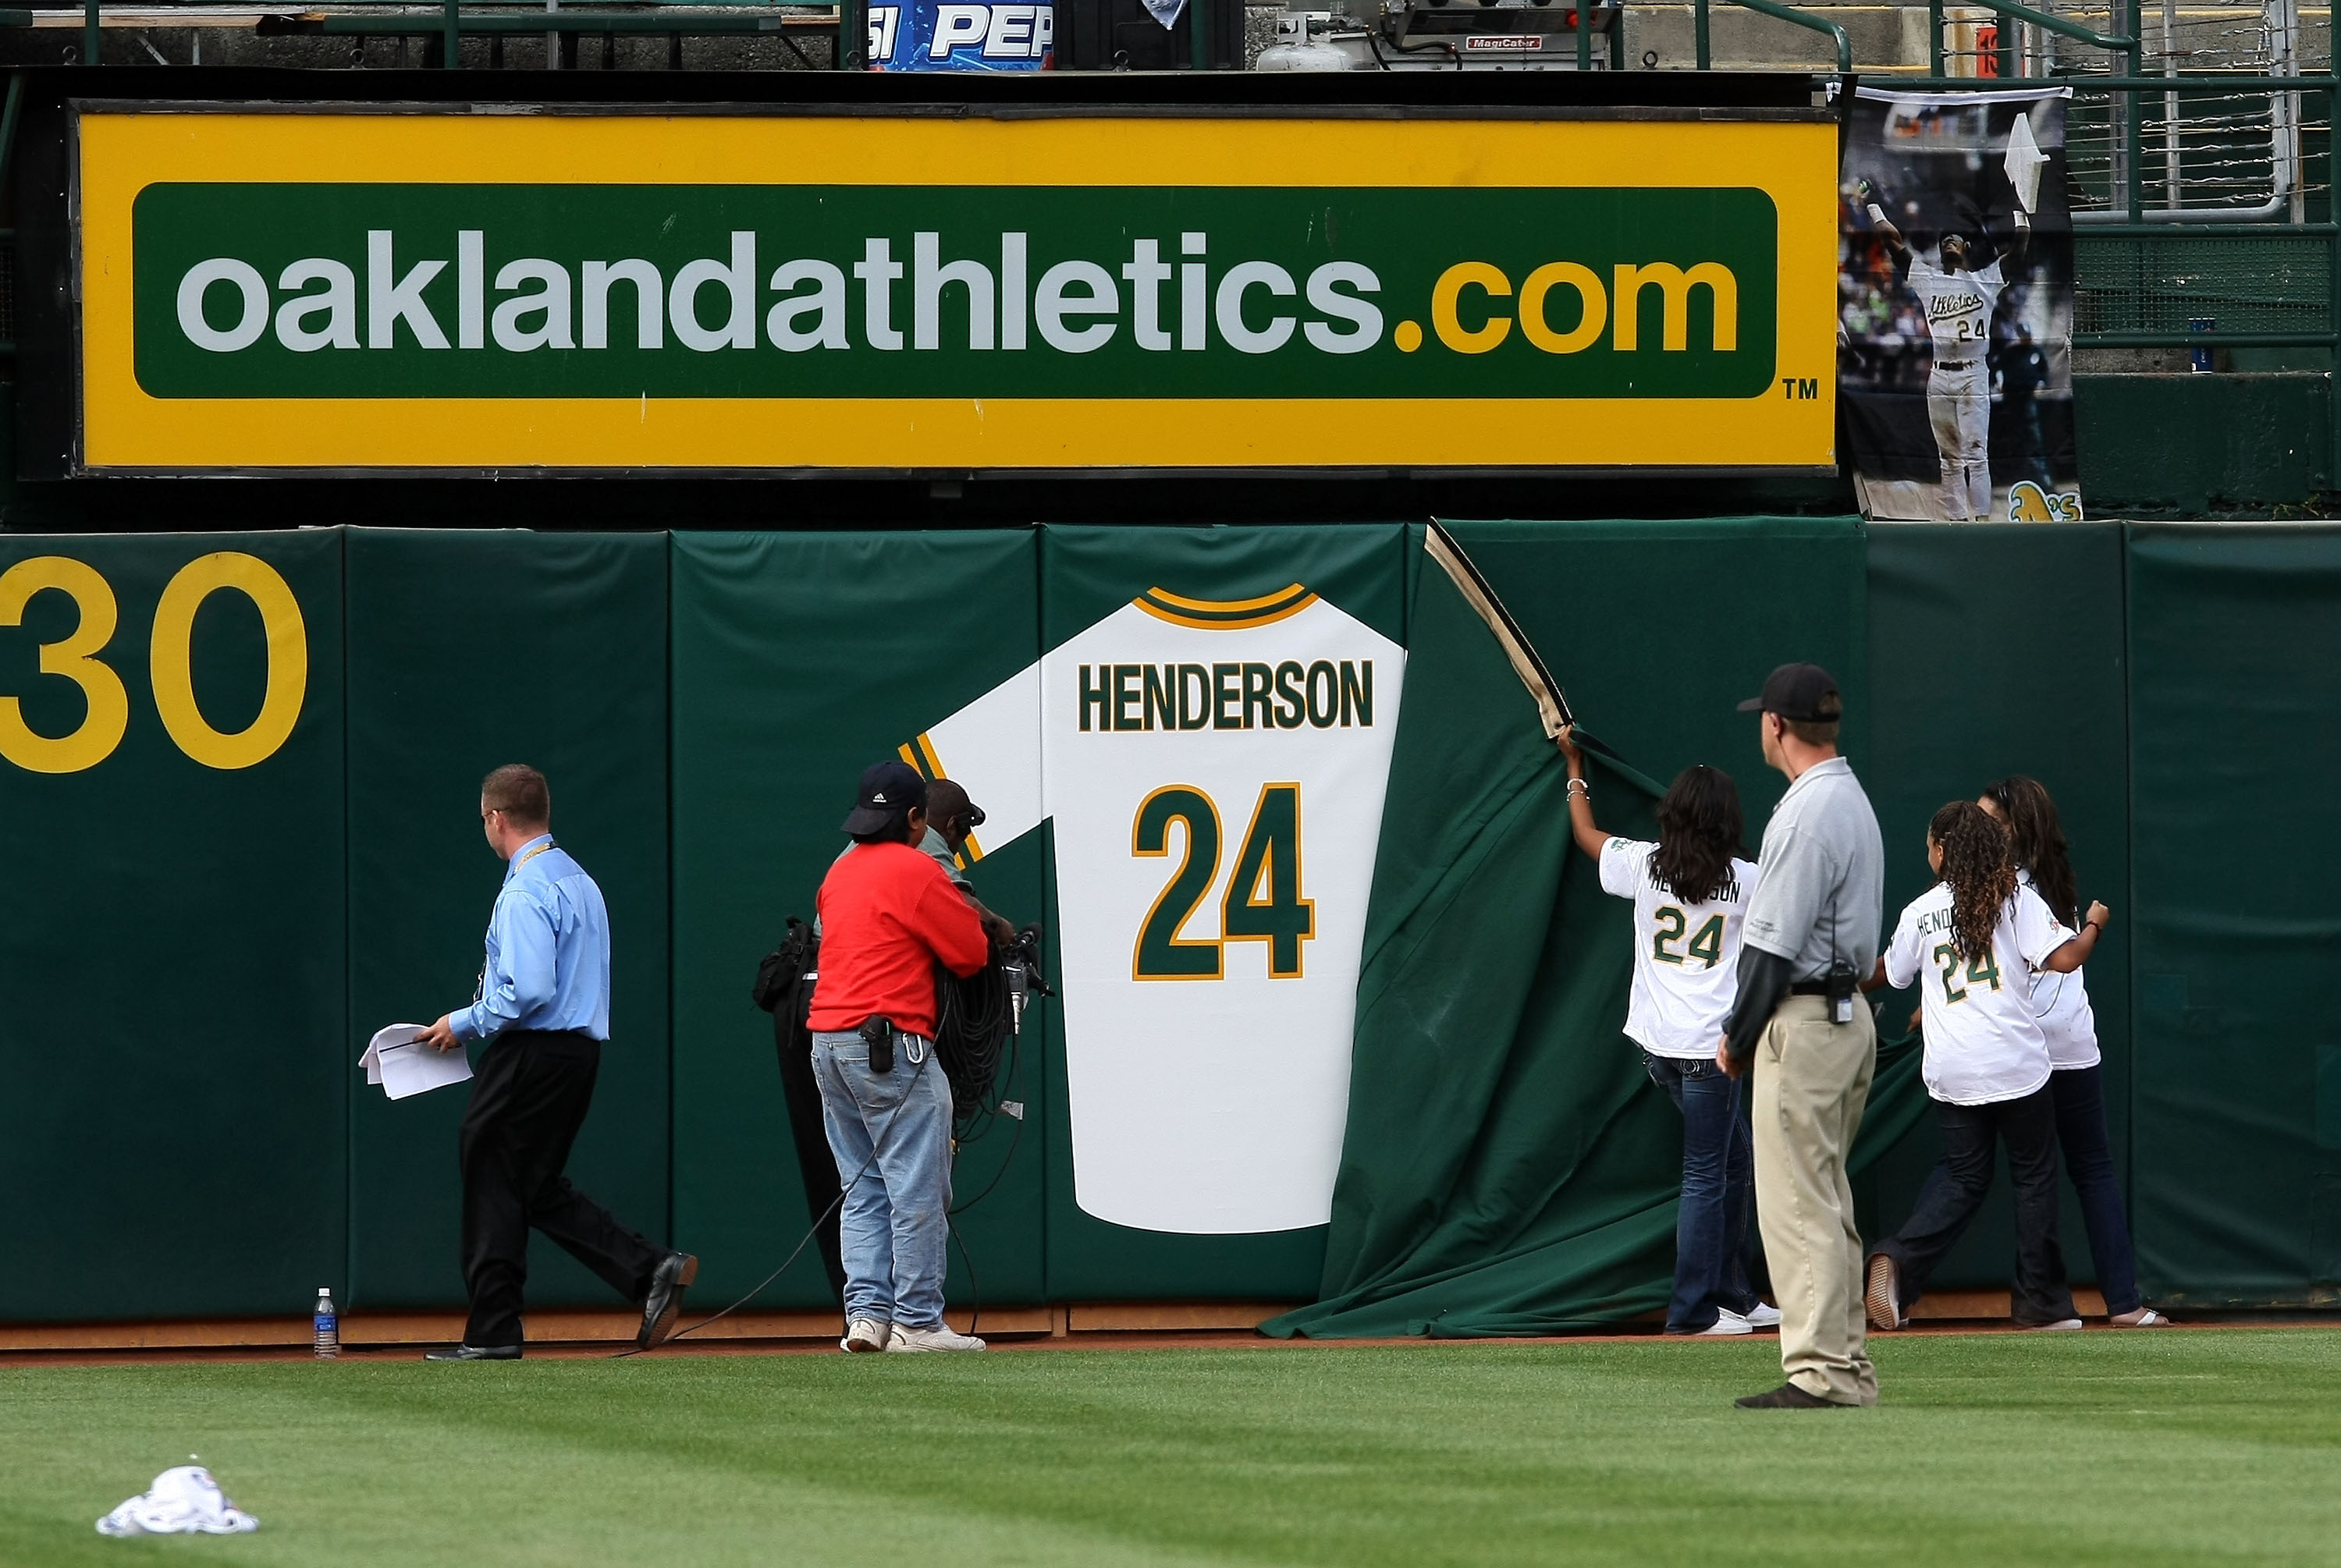 OAKLAND, CA - AUGUST 01:  Hall of Fame baseball player Rickey Henderson's retired jersey is unveiled during a ceremony to retire his number 24 by the Oakland Athletics before the start of the game against the Toronto Blue Jays August 1, 2009 at the McAfee